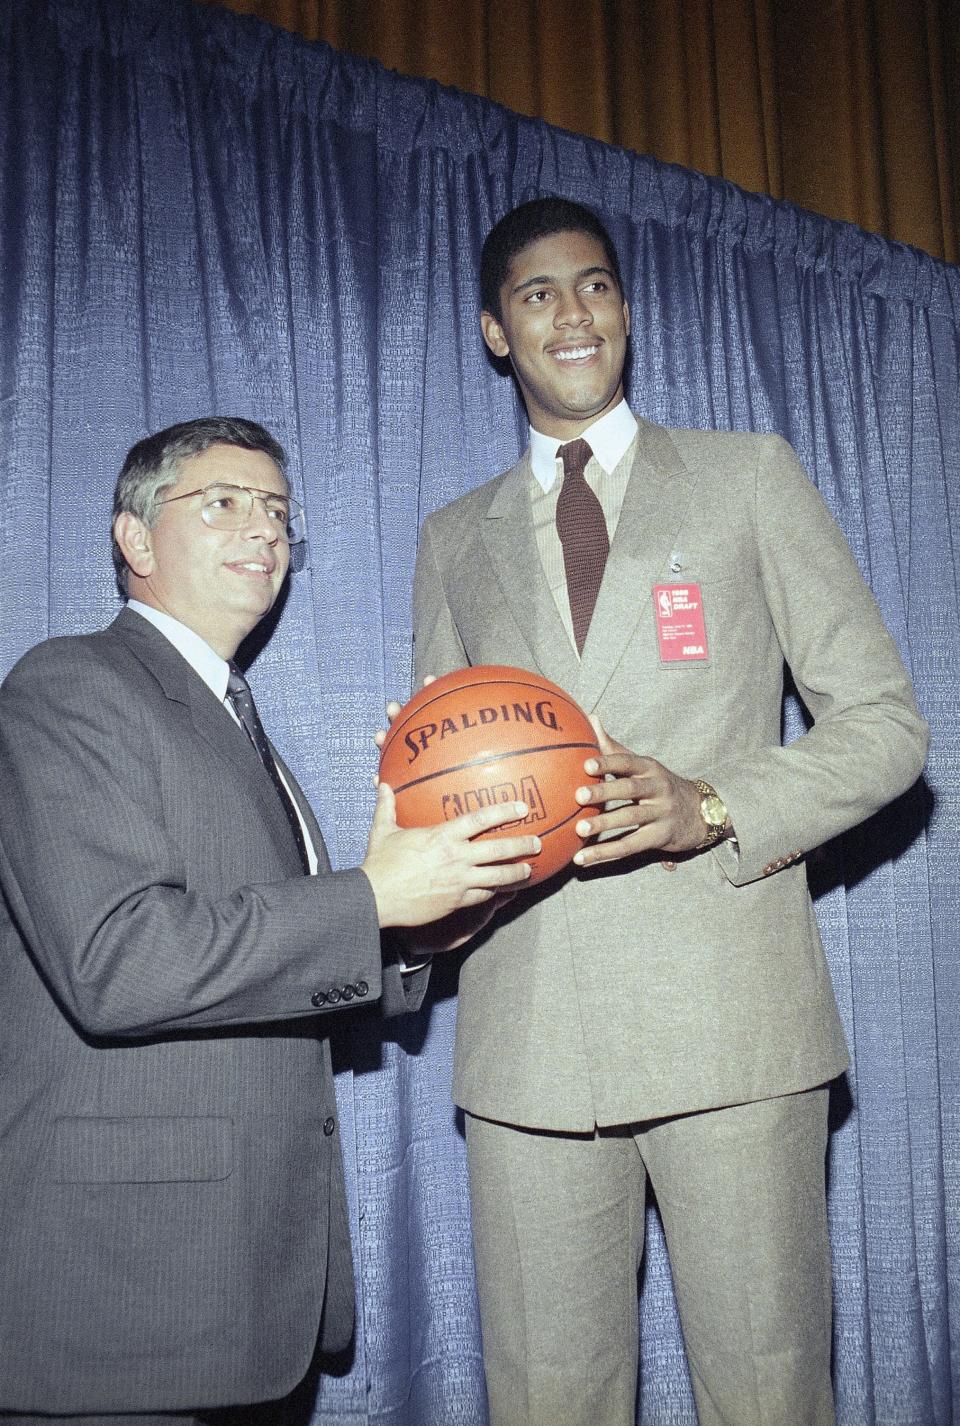 NBA Commissioner David Stern, left, stands with Brad Daugherty of North Carolina after the center was taken first in the NBA draft in New York on Tuesday, June 17, 1986 by the Cleveland Cavaliers.